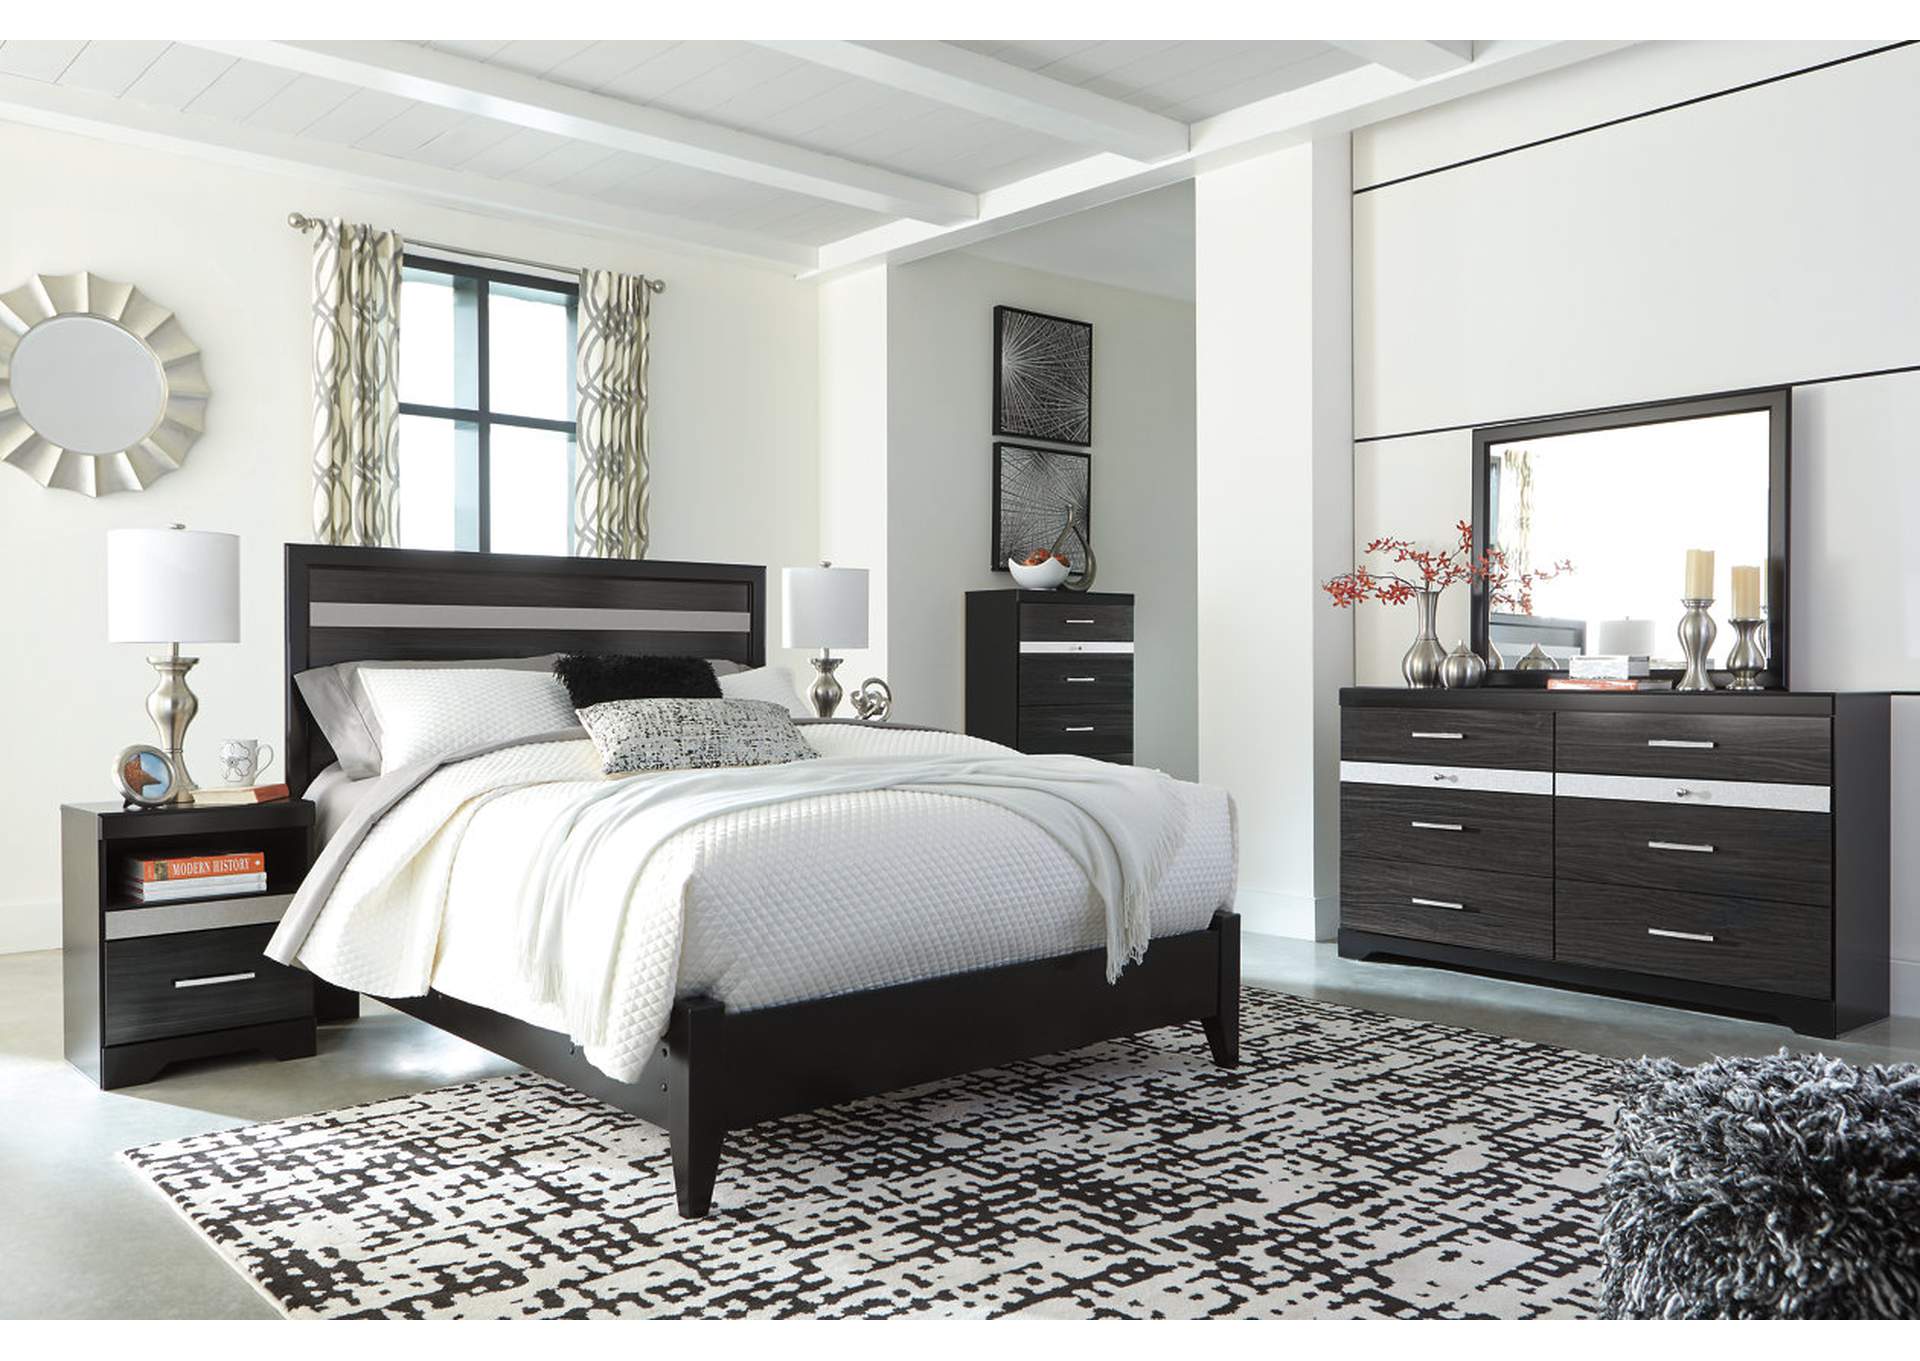 Starberry Queen Panel Bed,Signature Design By Ashley